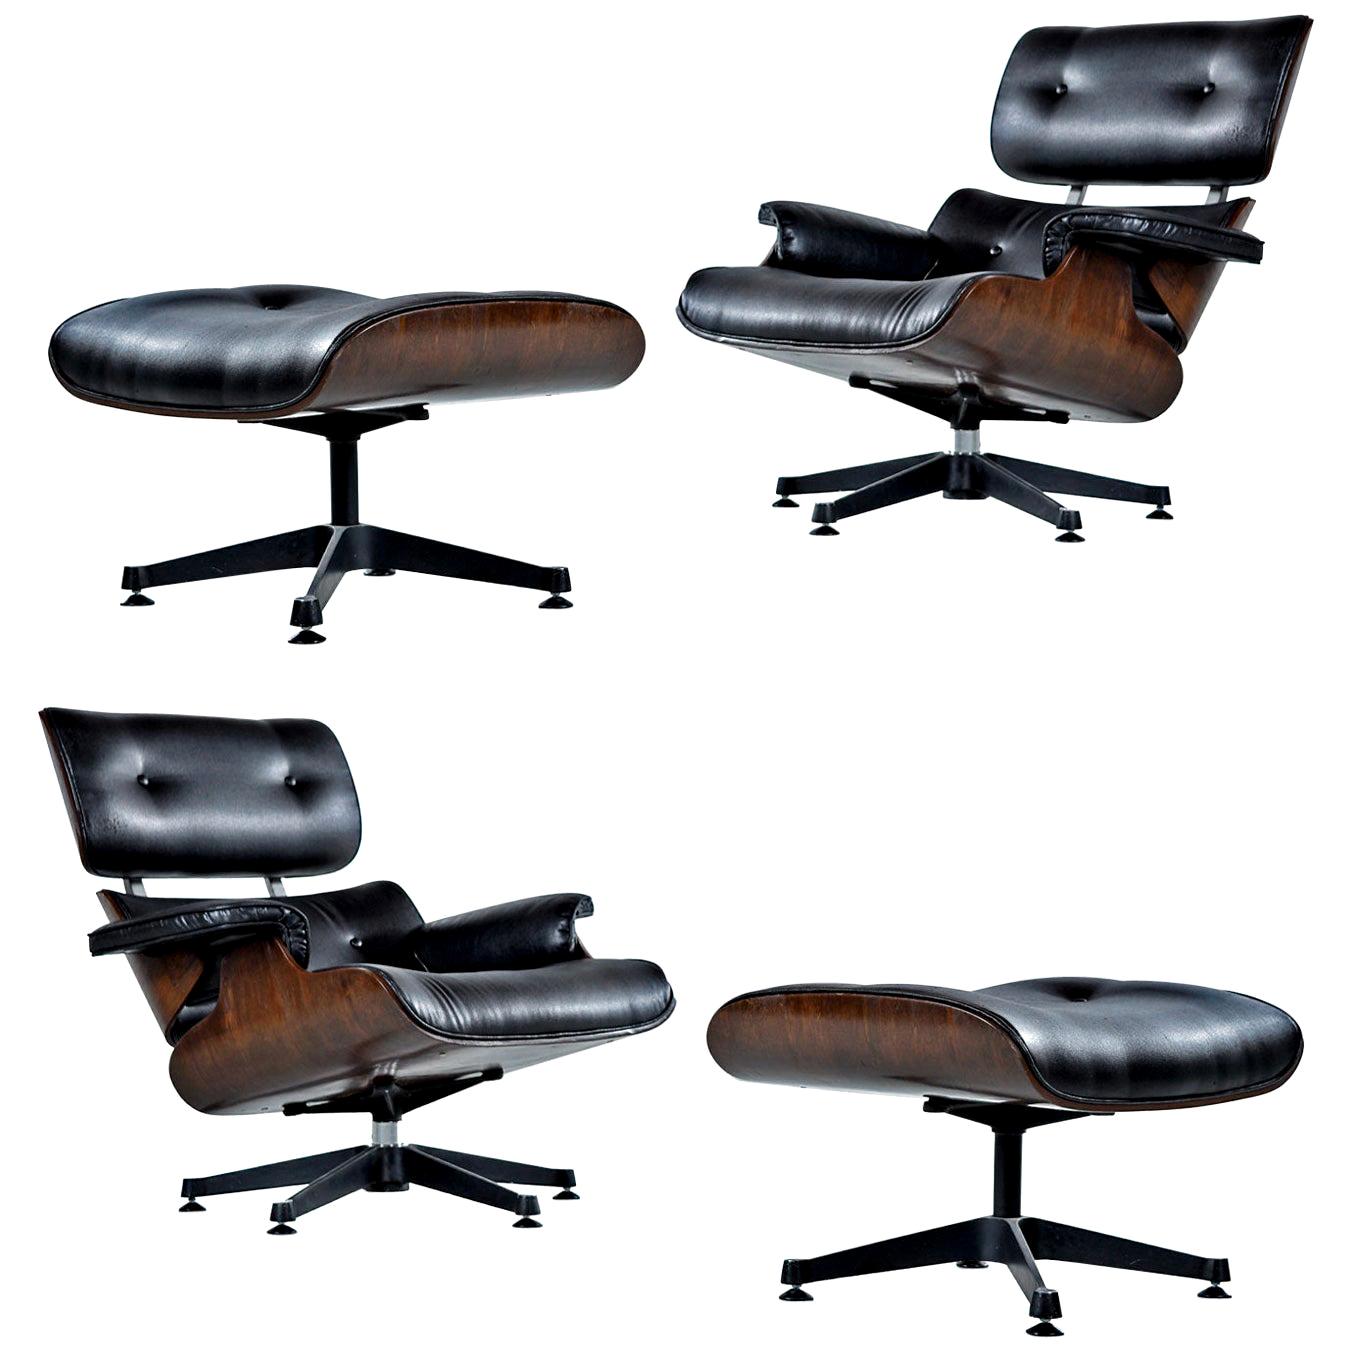 Vintage Walnut Eames Lounge Chair and Ottoman Replica Set in Black Leather